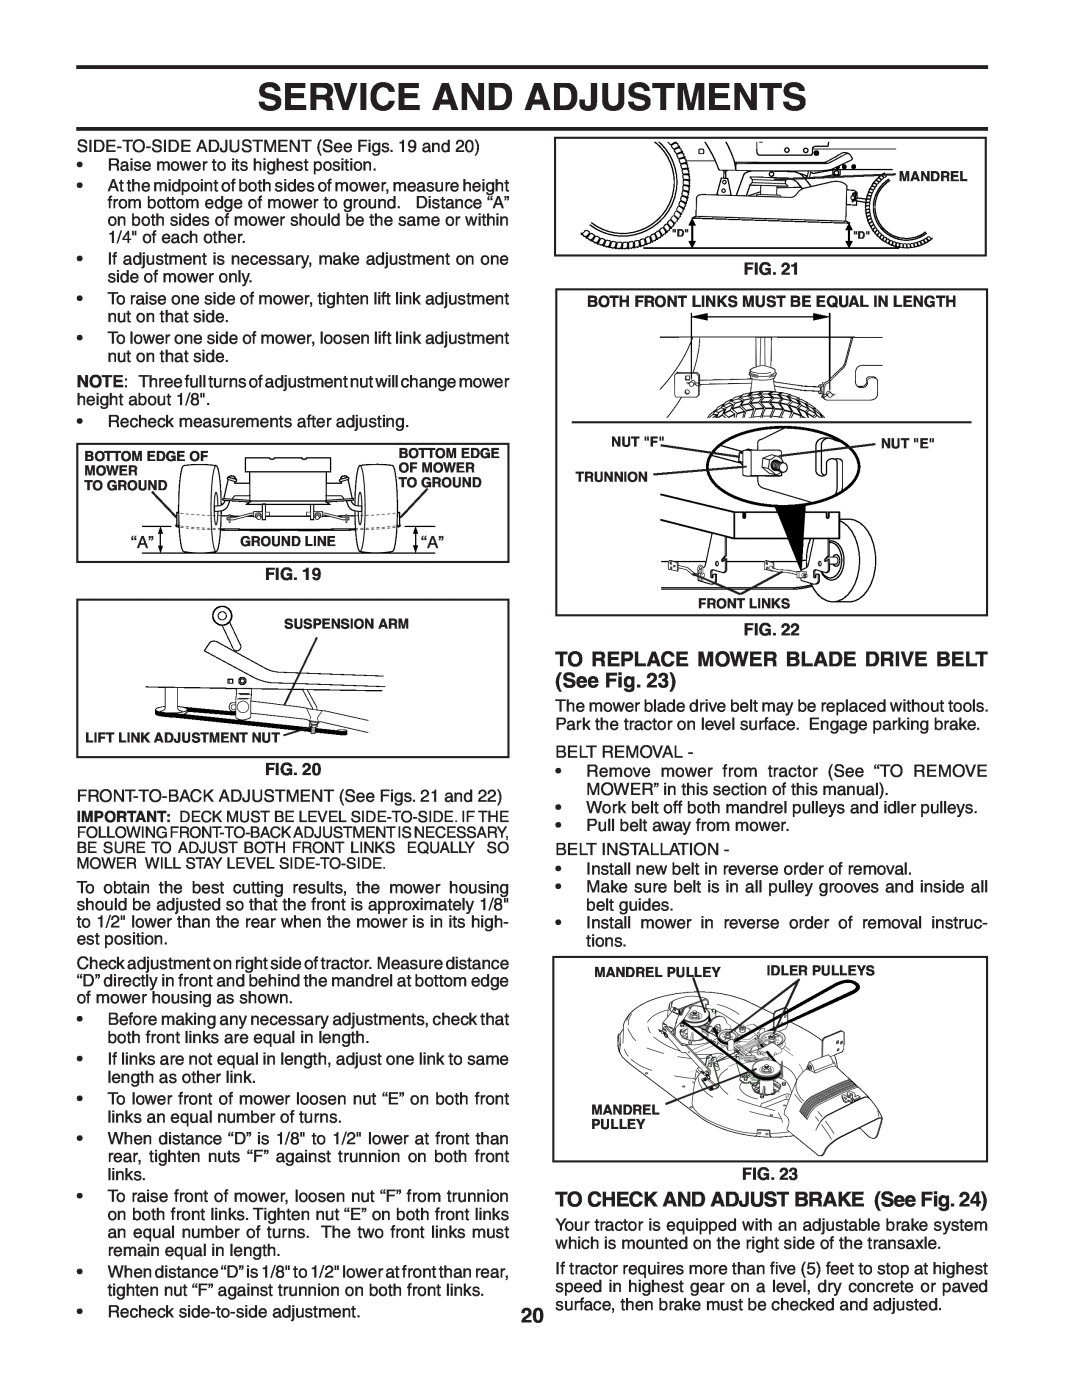 Poulan PD185H42STC TO REPLACE MOWER BLADE DRIVE BELT See Fig, TO CHECK AND ADJUST BRAKE See Fig, Service And Adjustments 